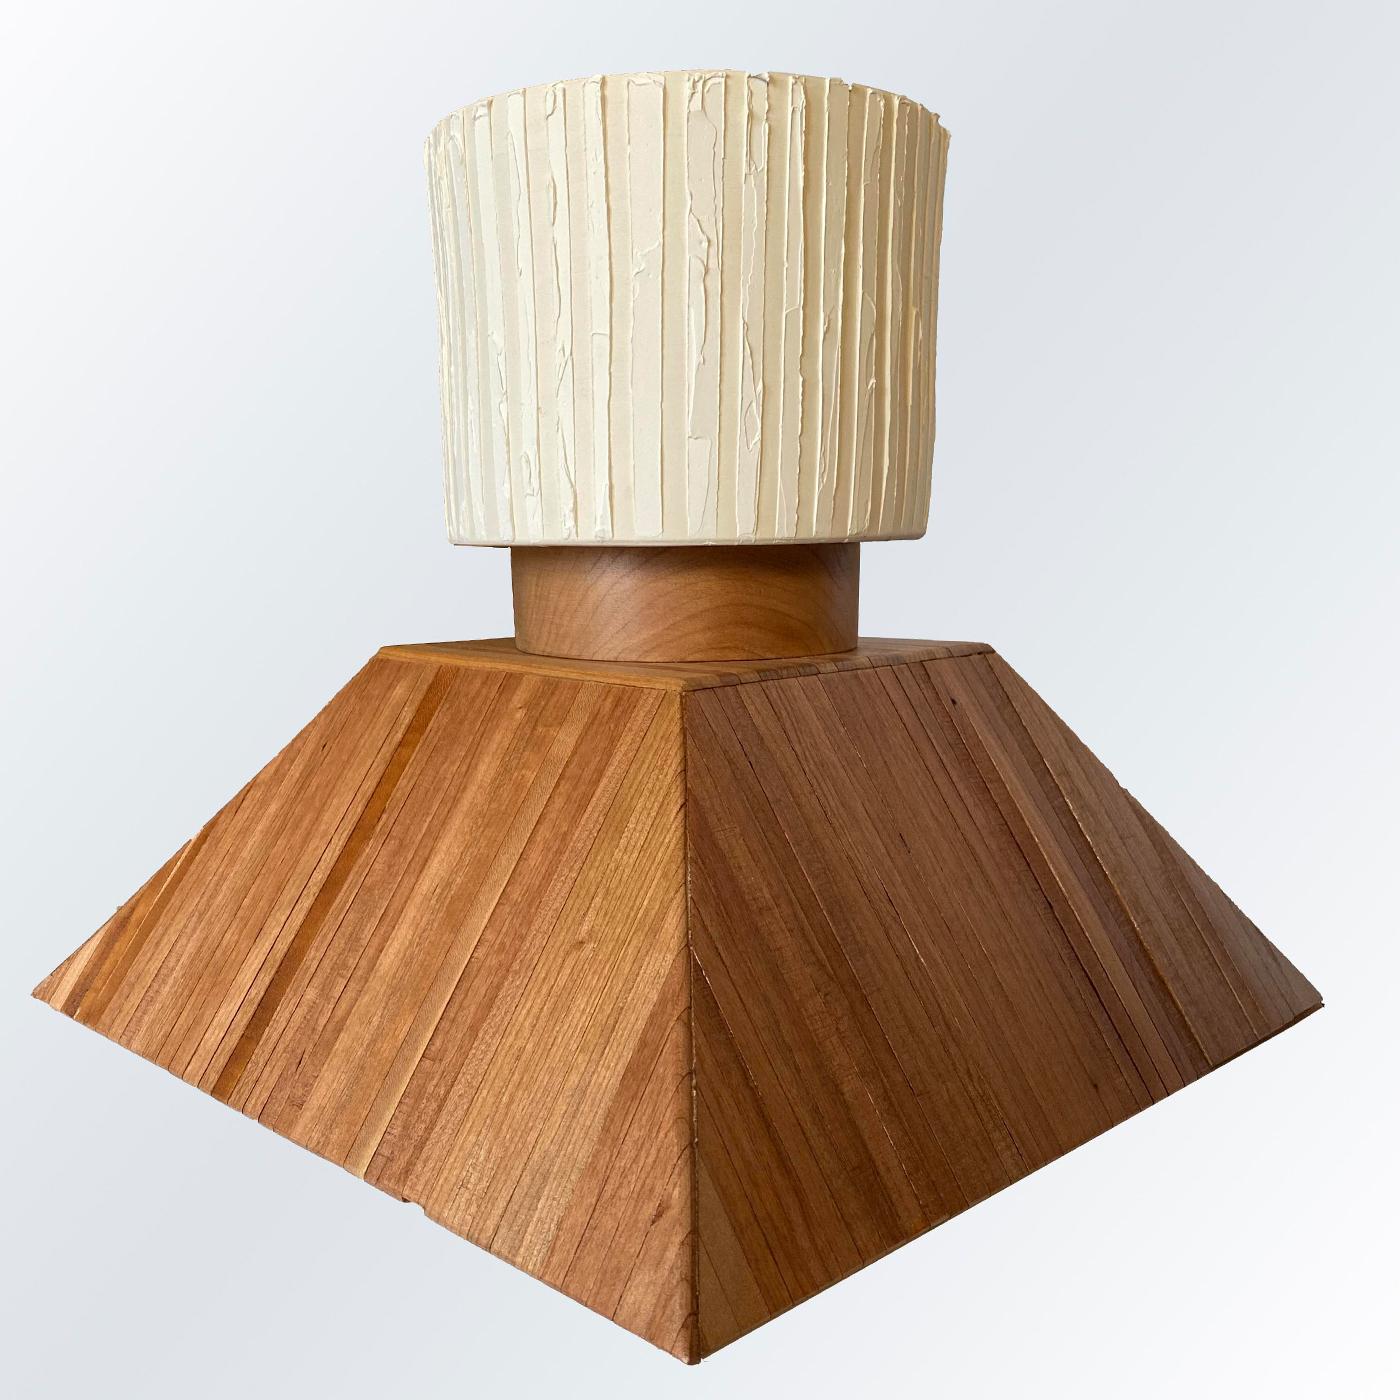 Boasting a remarkable aesthetic with a distinct, rigorous geometric influence, this table lamp is a one-off design fully handcrafted, numbered, and signed by Mascia Meccani. The ridged base in solid cherry comprises a lower element shaped like a